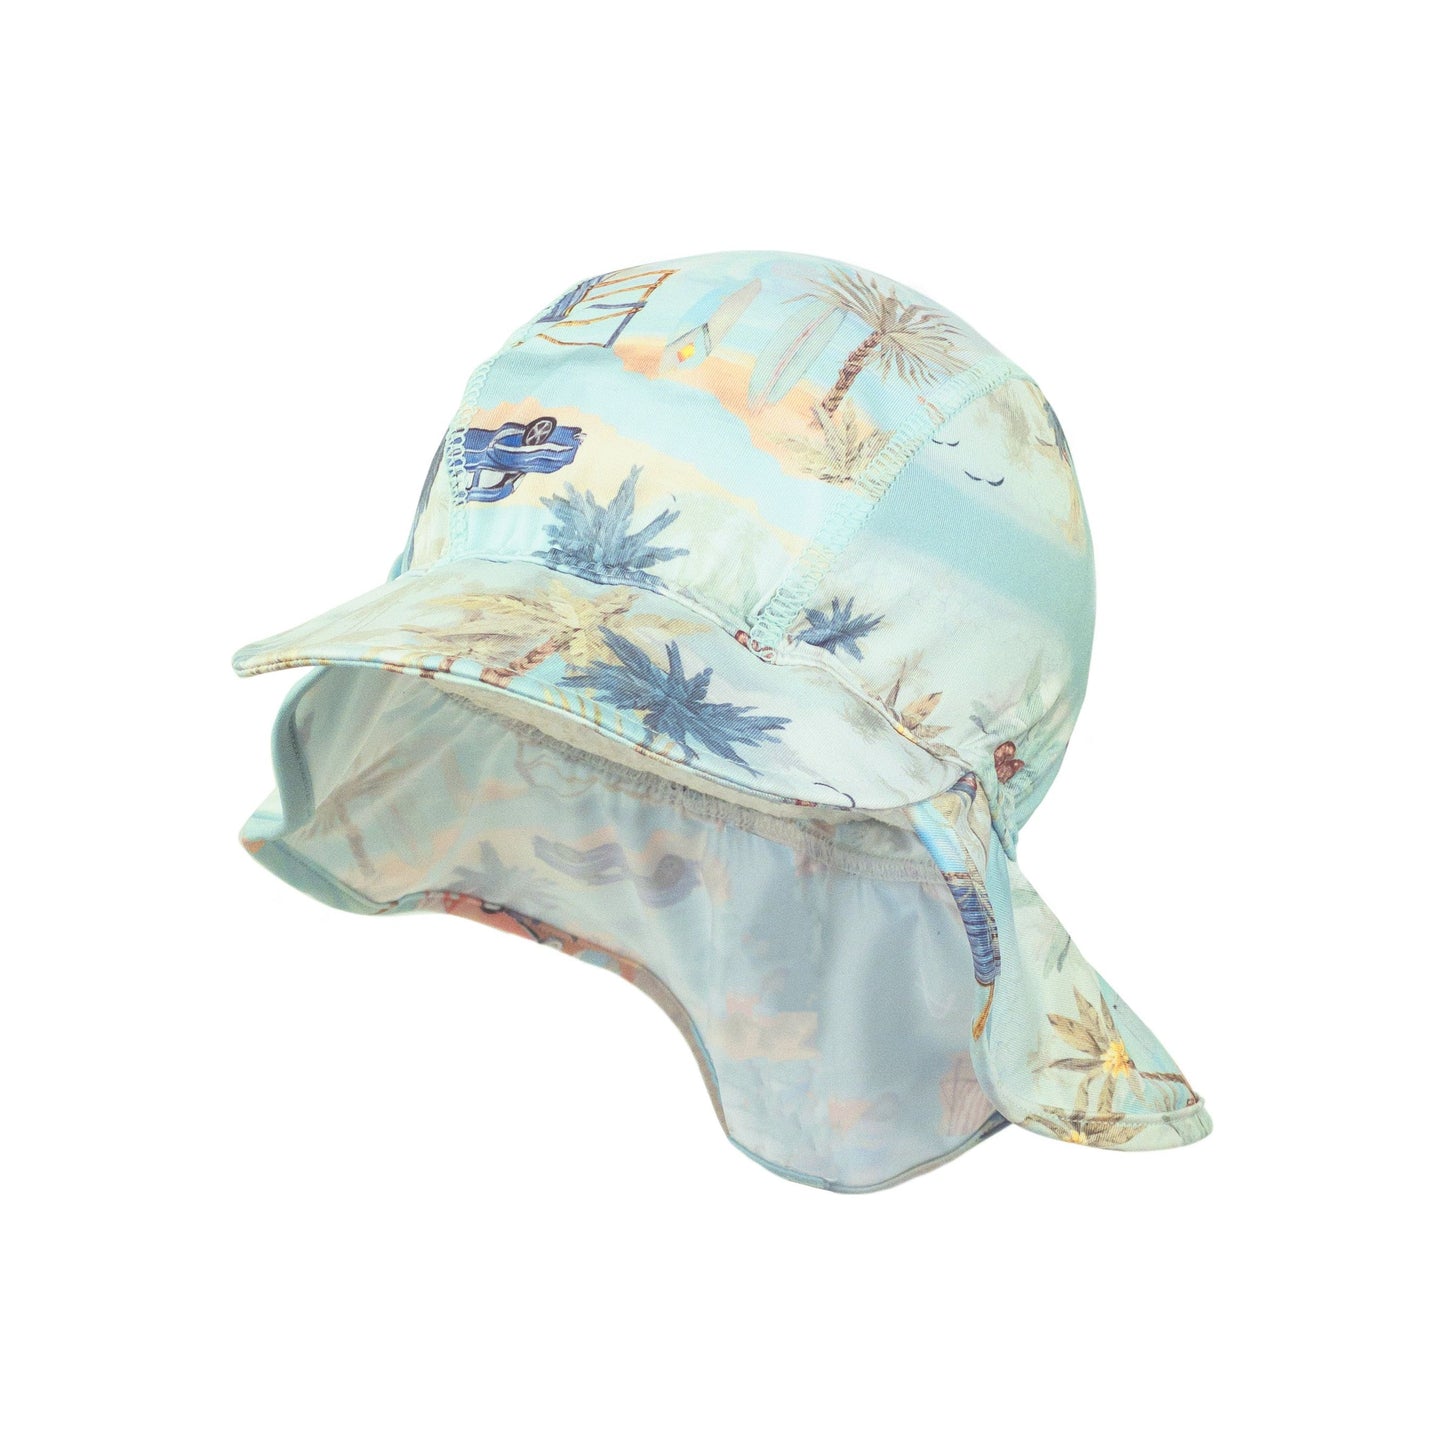 Boys pale blue sun hat for the pool by Jamiks - Adora Childrenswear 